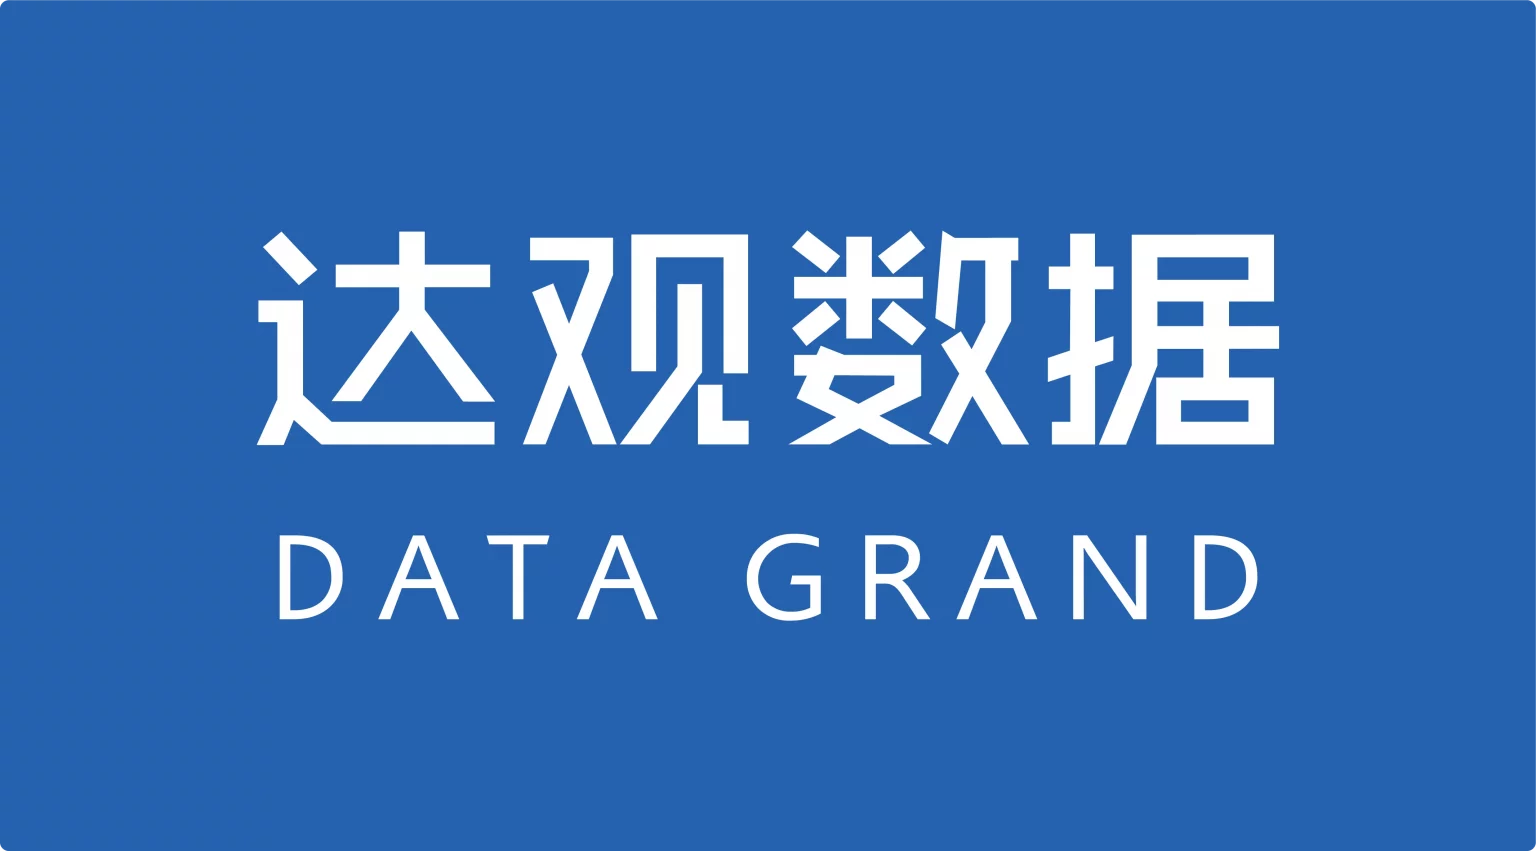 Shangai-based DataGrand, which makes office tools that combine robotic process automation with intelligent document process, raises a $90M Series C (FinSMEs)